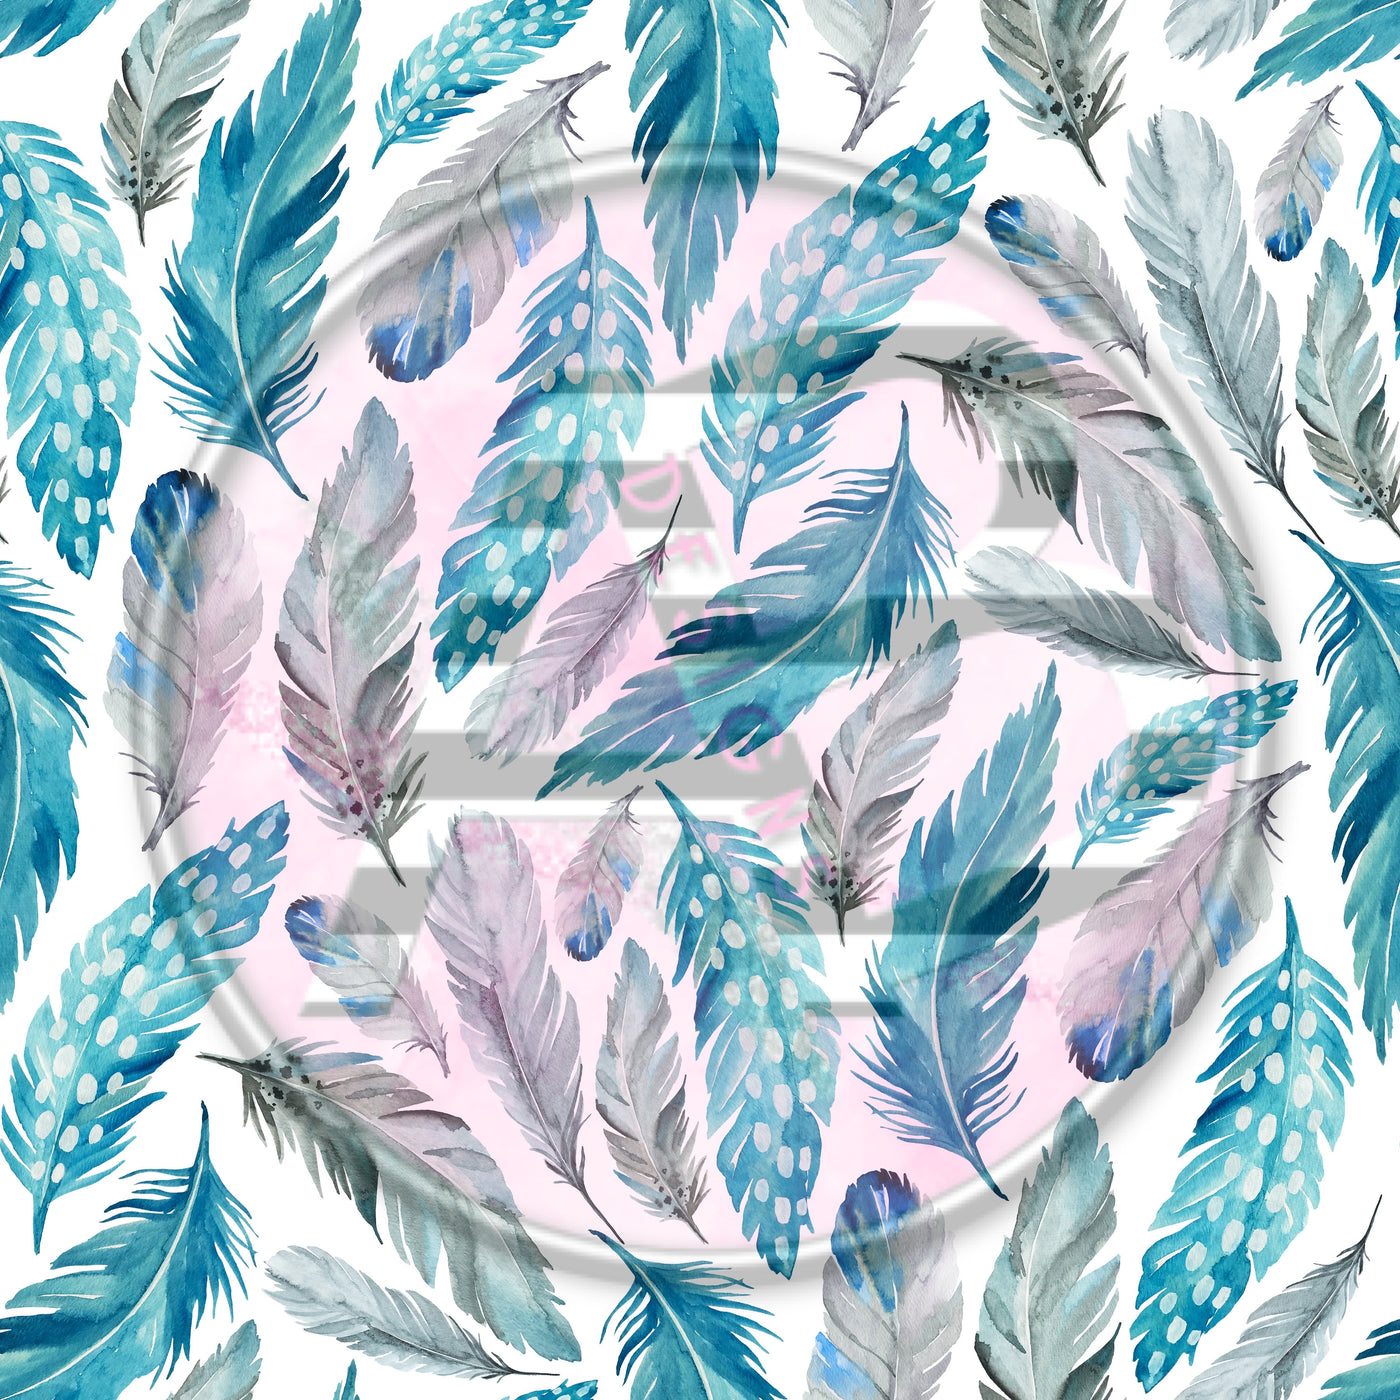 Adhesive Patterned Vinyl - Feathers 281